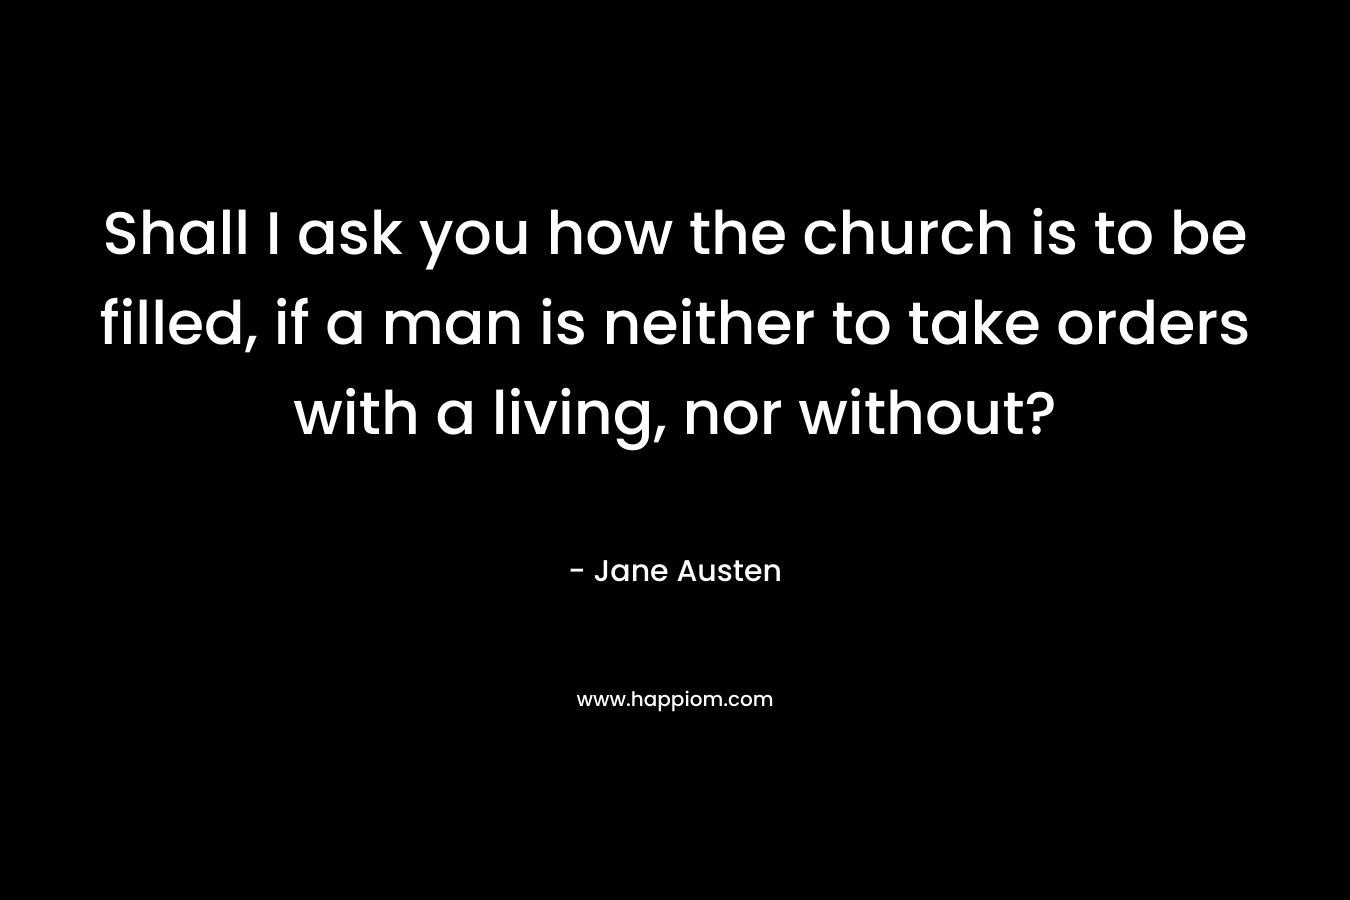 Shall I ask you how the church is to be filled, if a man is neither to take orders with a living, nor without? – Jane Austen